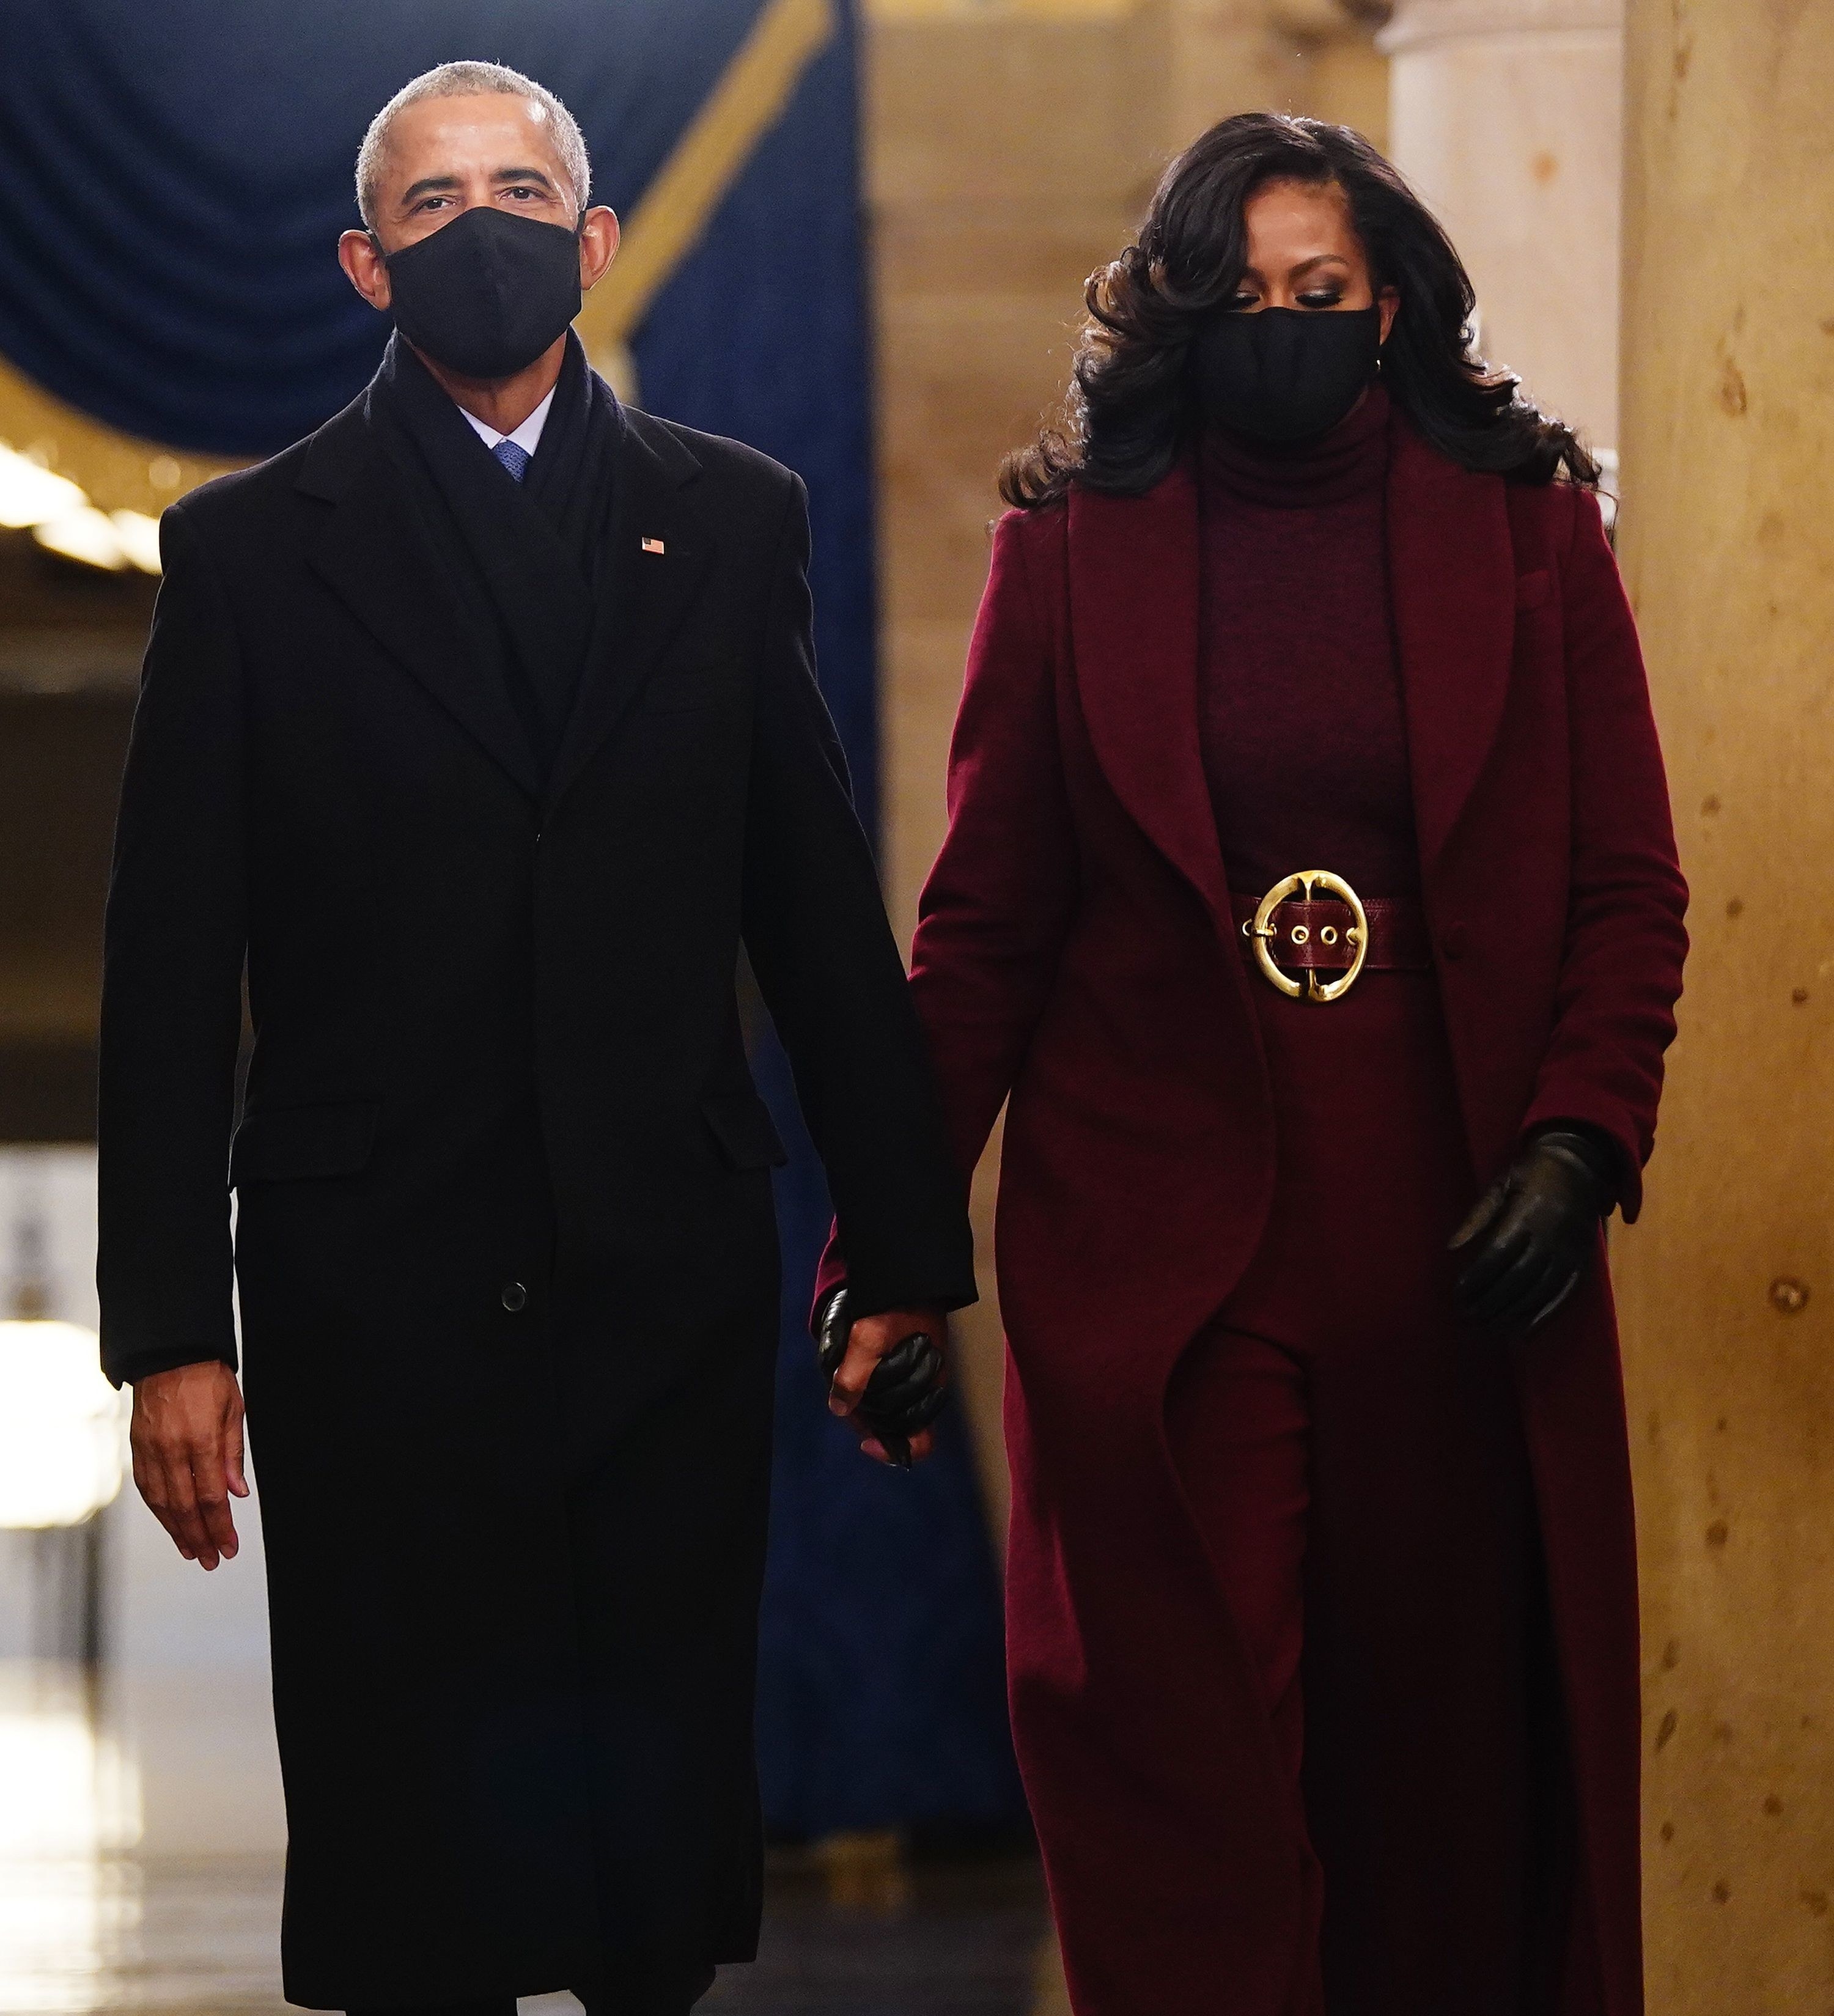 Barack and Michelle Obama masked and holding hands